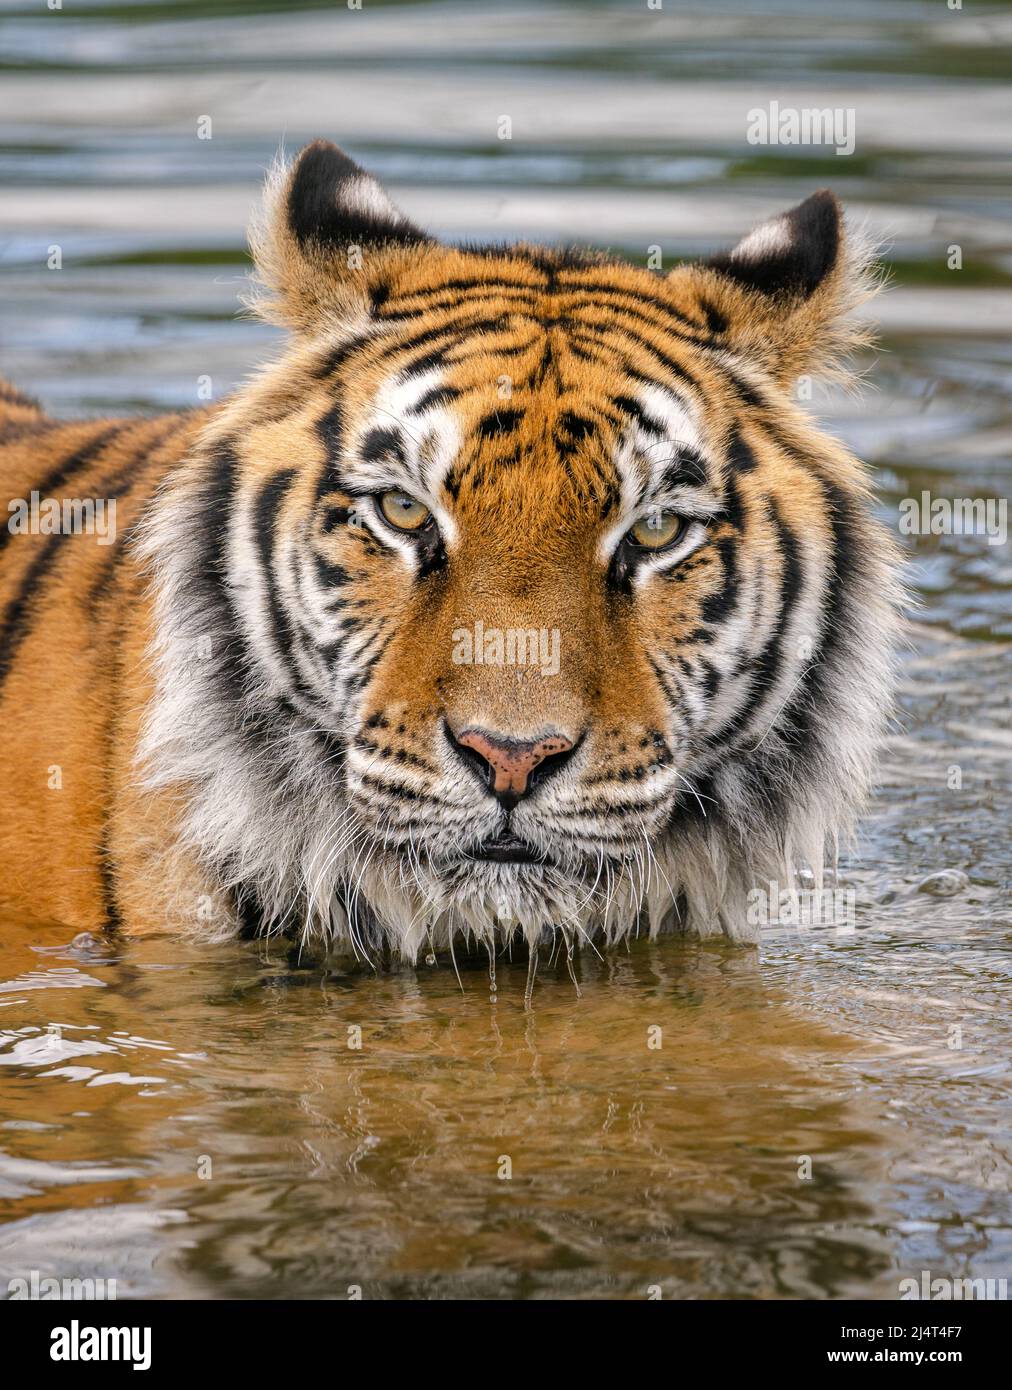 Close up portrait of Indian Tiger standing in a river with eye contact Stock Photo